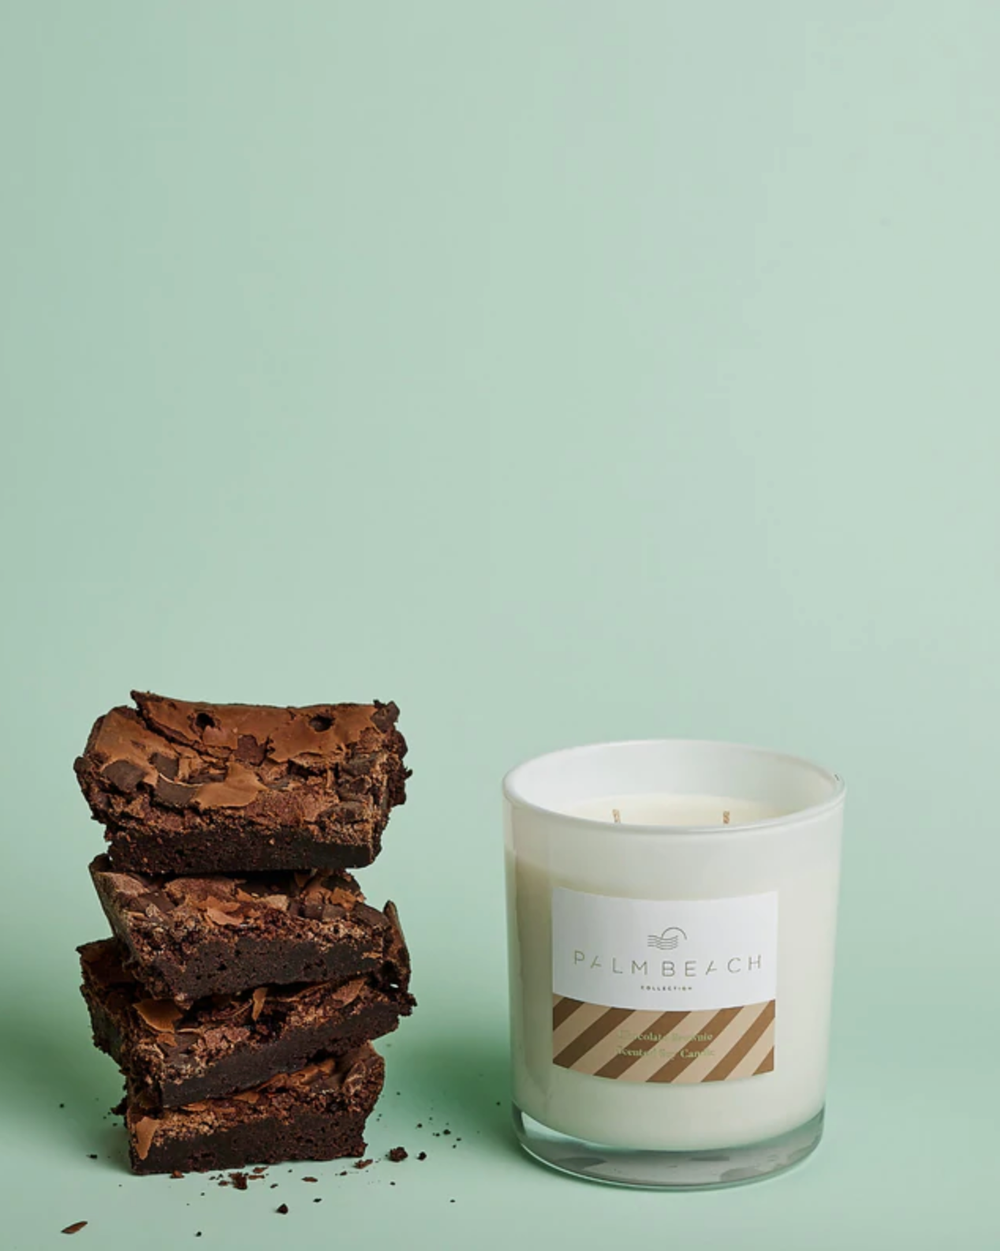 Palm Beach Limited Edition Candle - Chocolate Brownie 420g